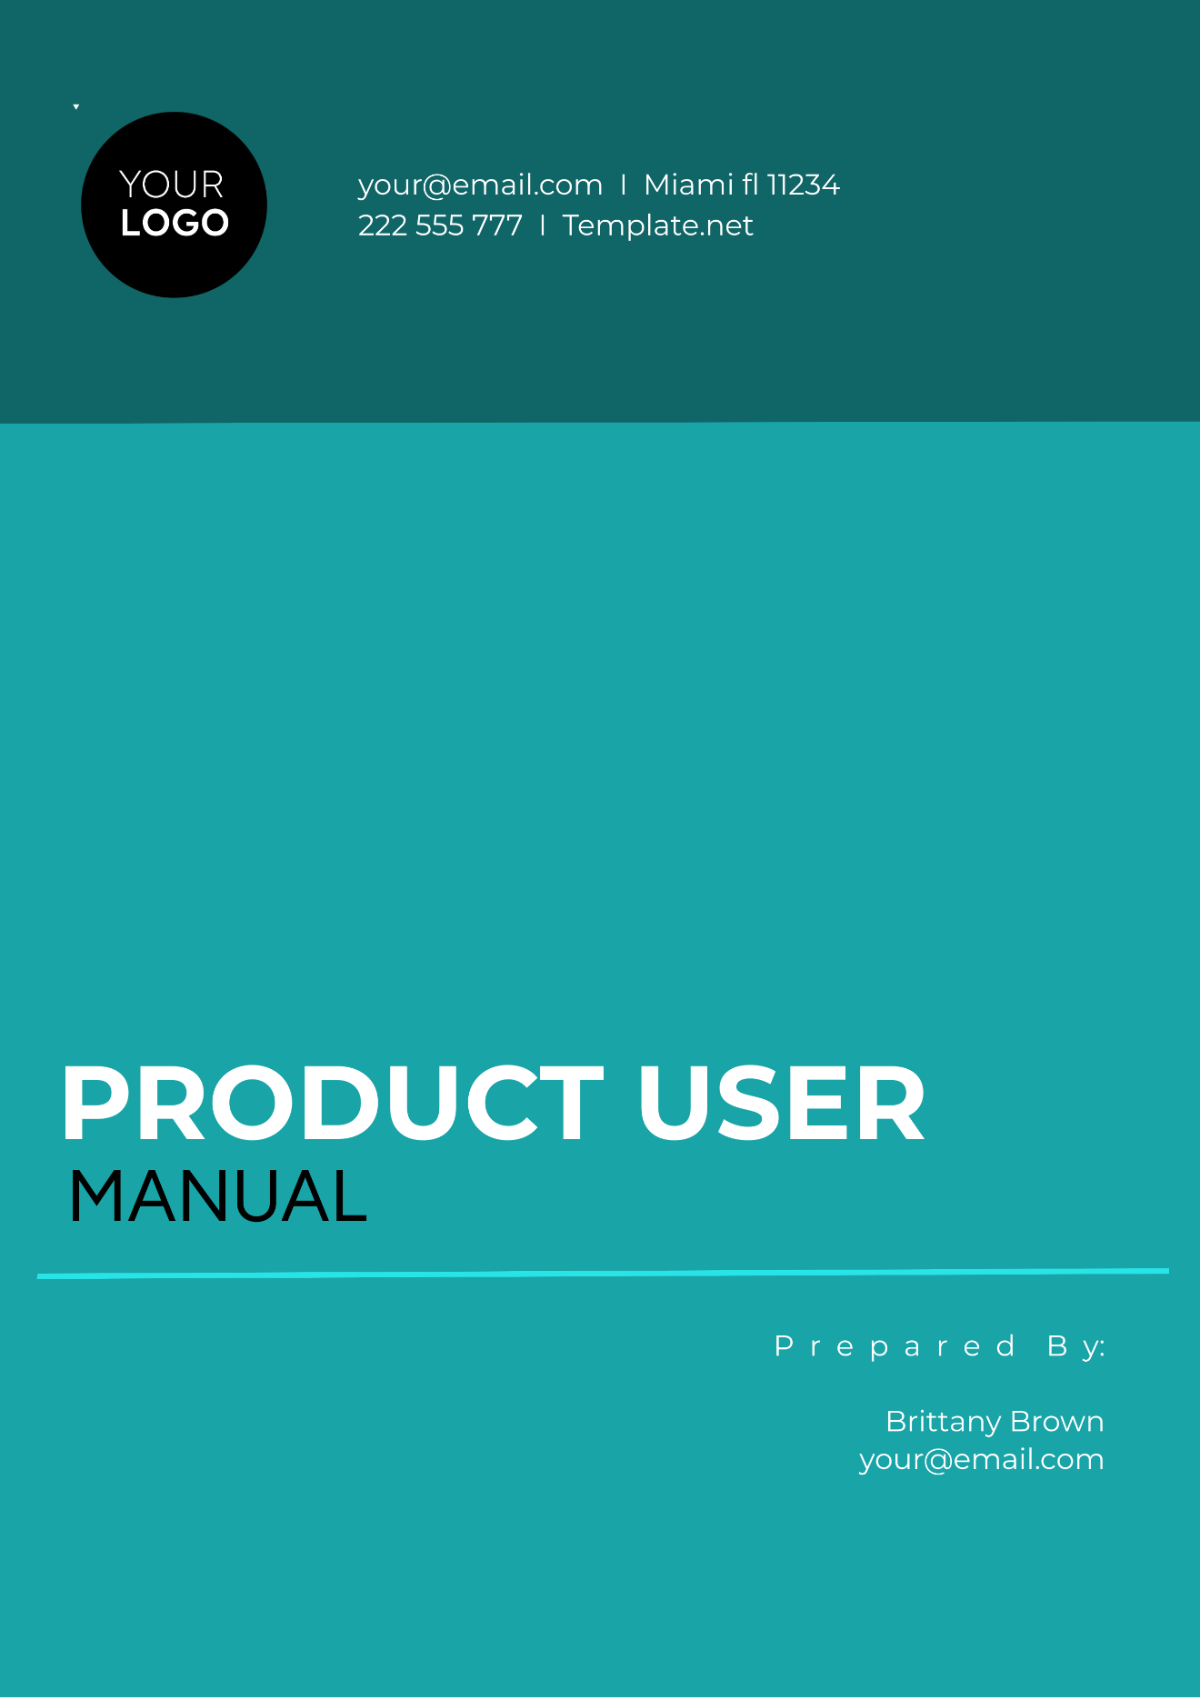 Product User Manual Template